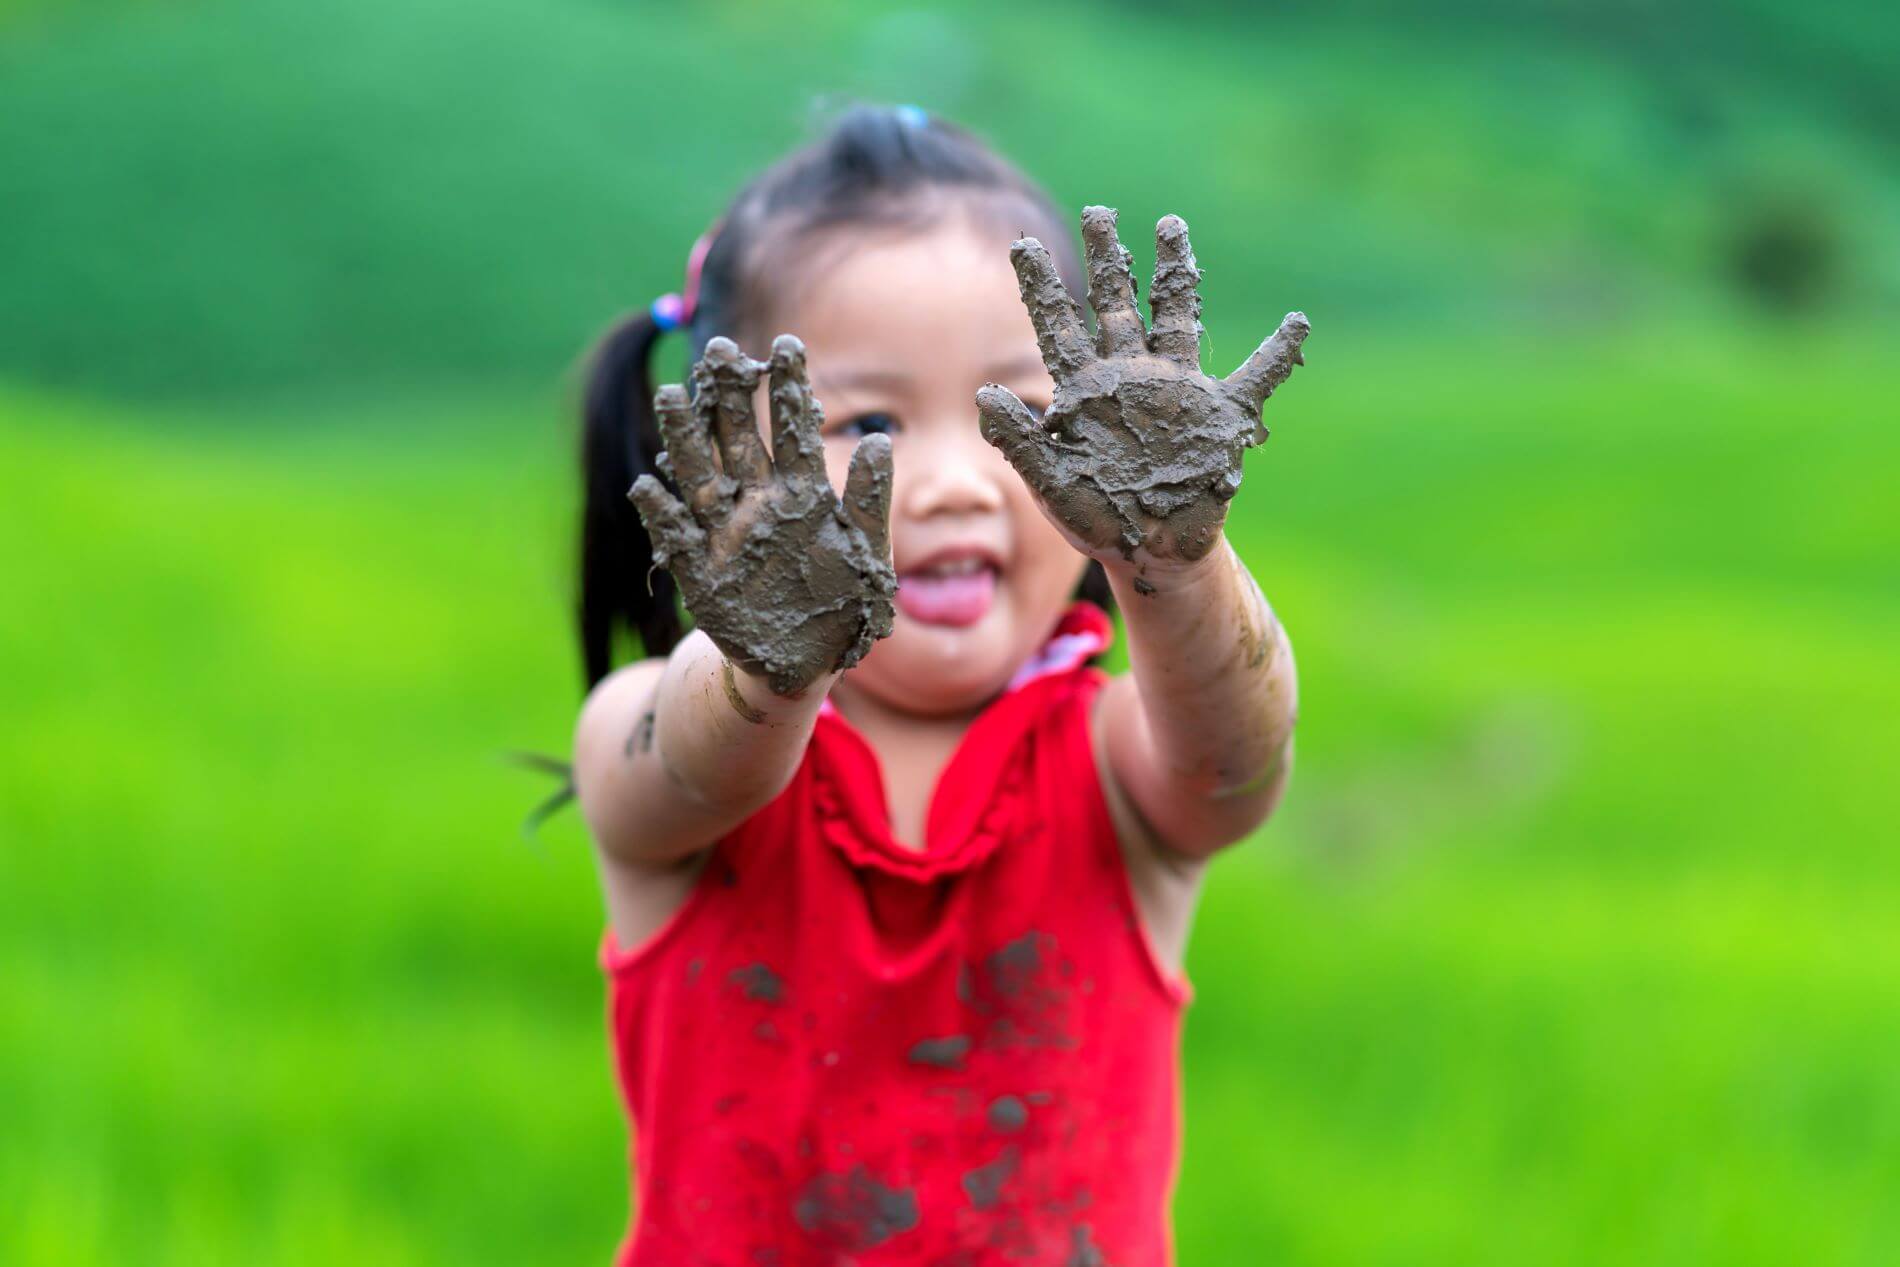 Kid playing with mud.